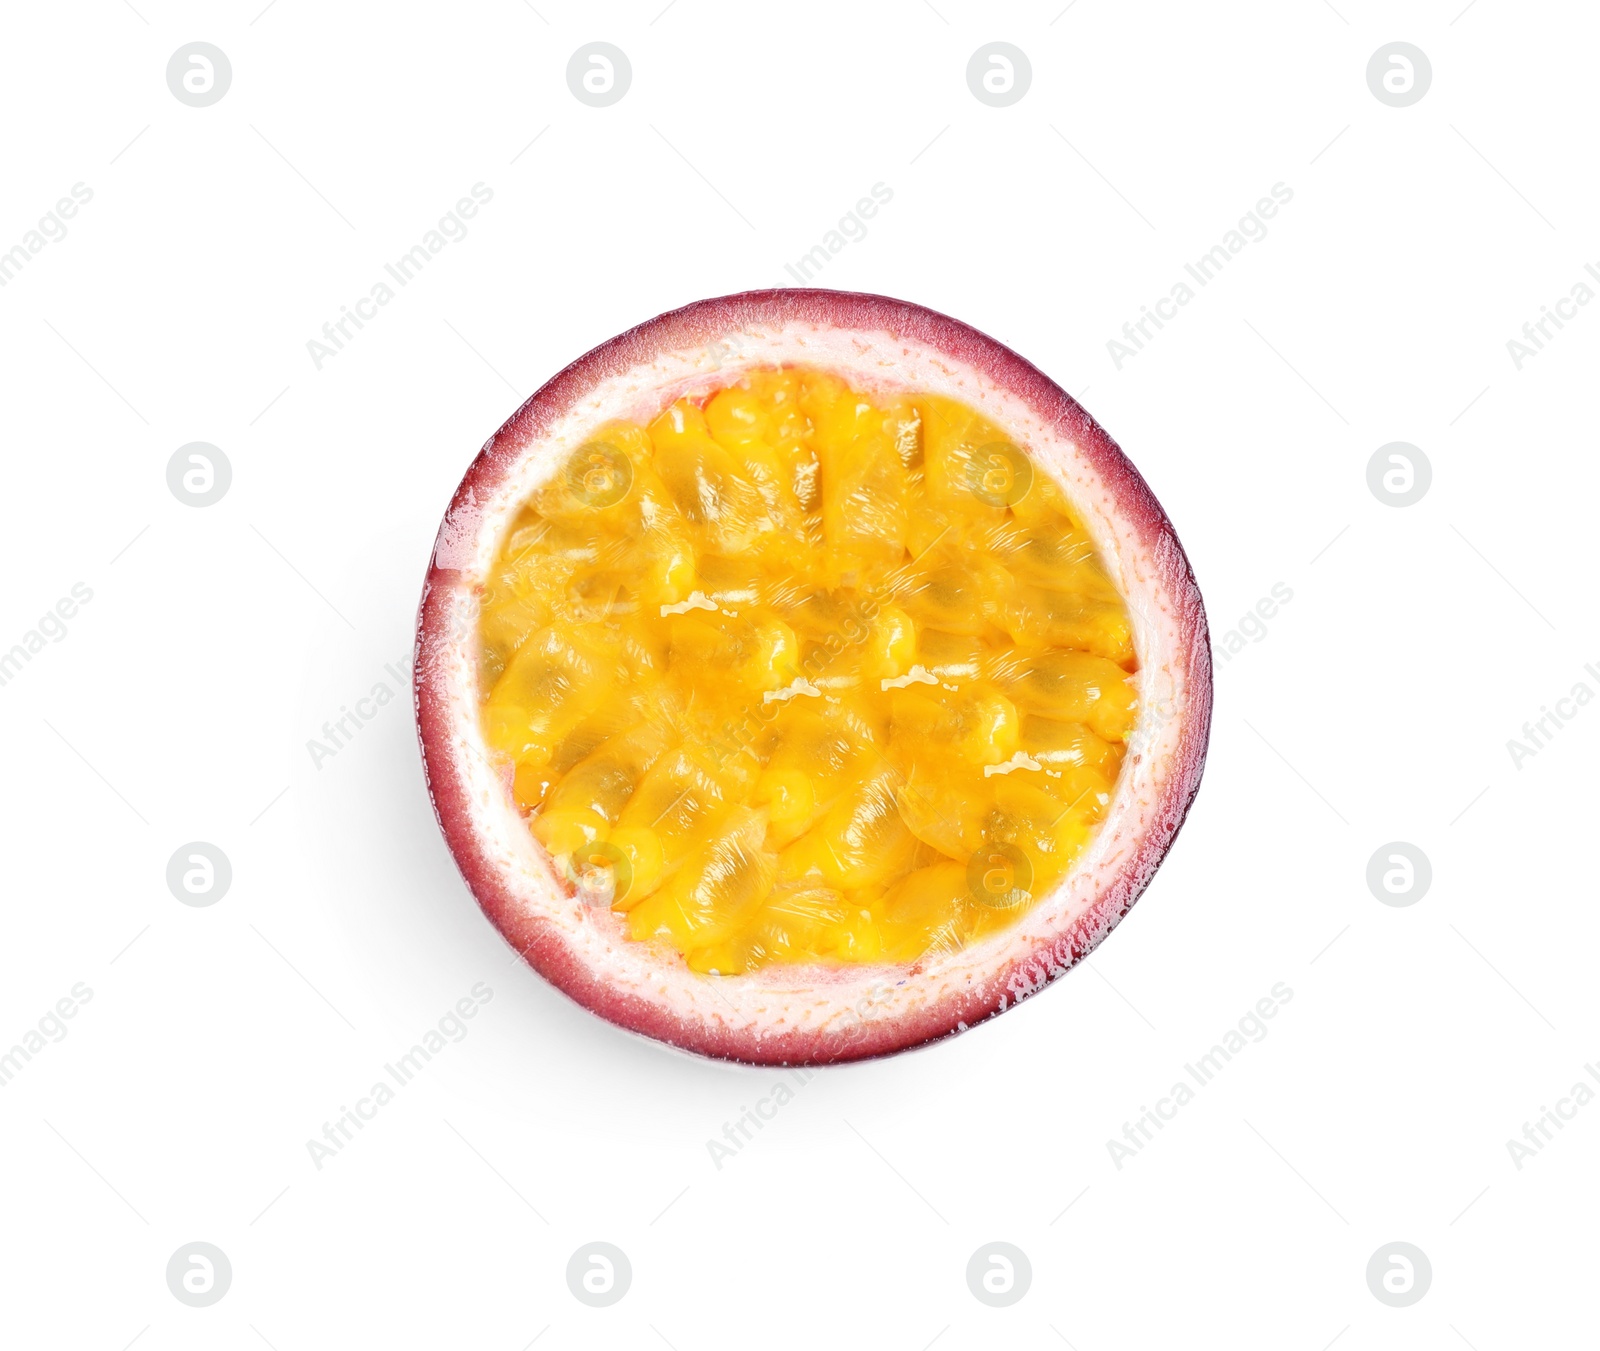 Photo of Half of delicious passion fruit (maracuya) on white background, top view